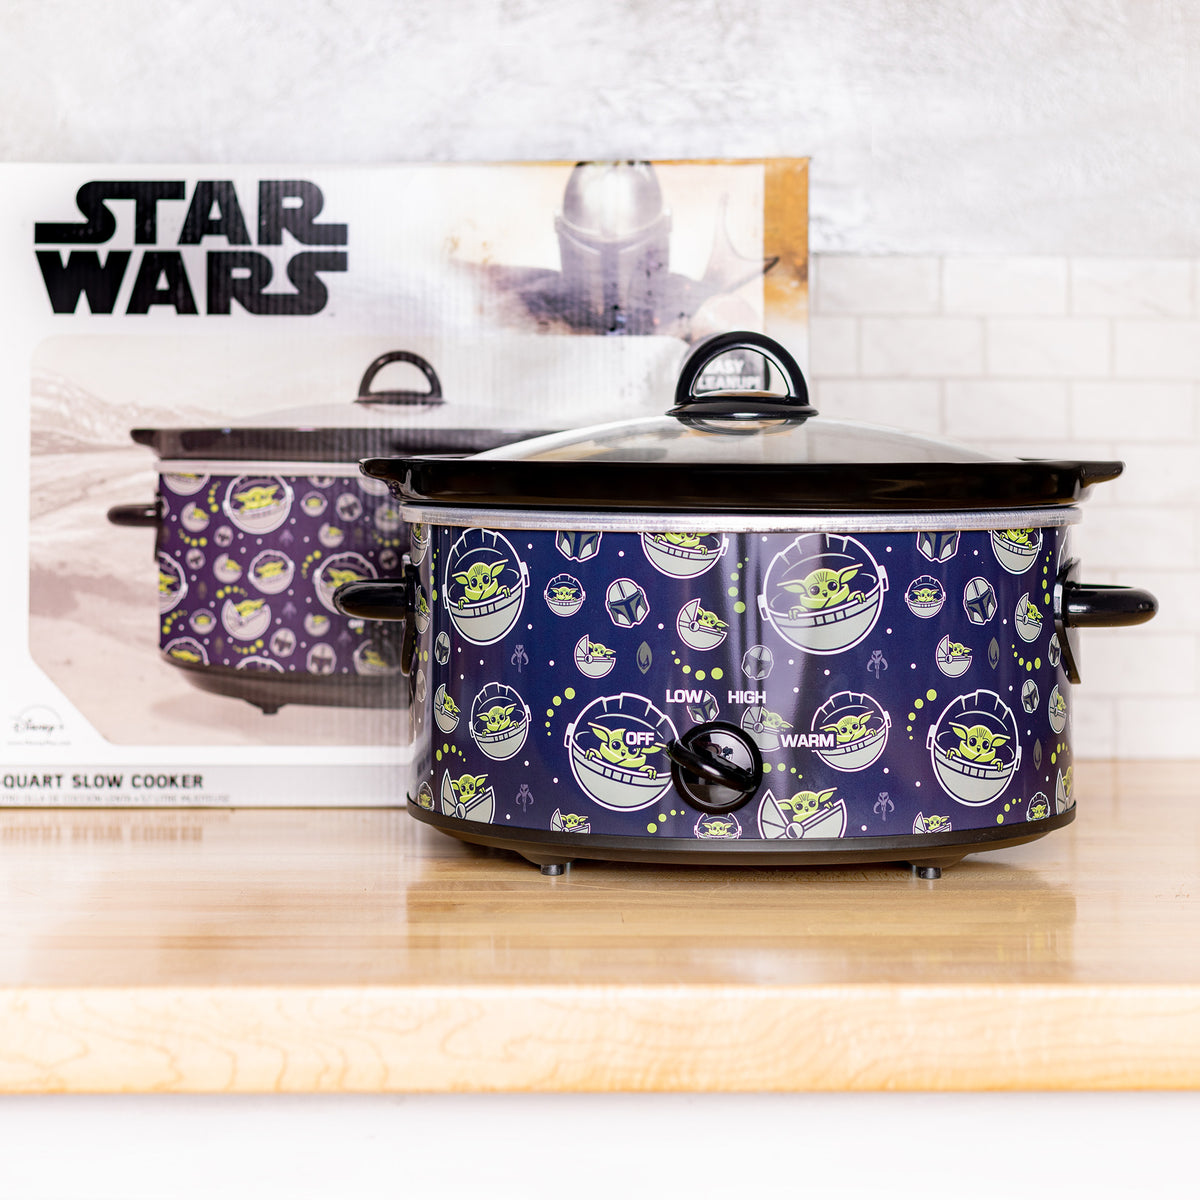 Baby Yoda Is Making His Way Into Your Kitchen With These Themed Slow  Cookers!